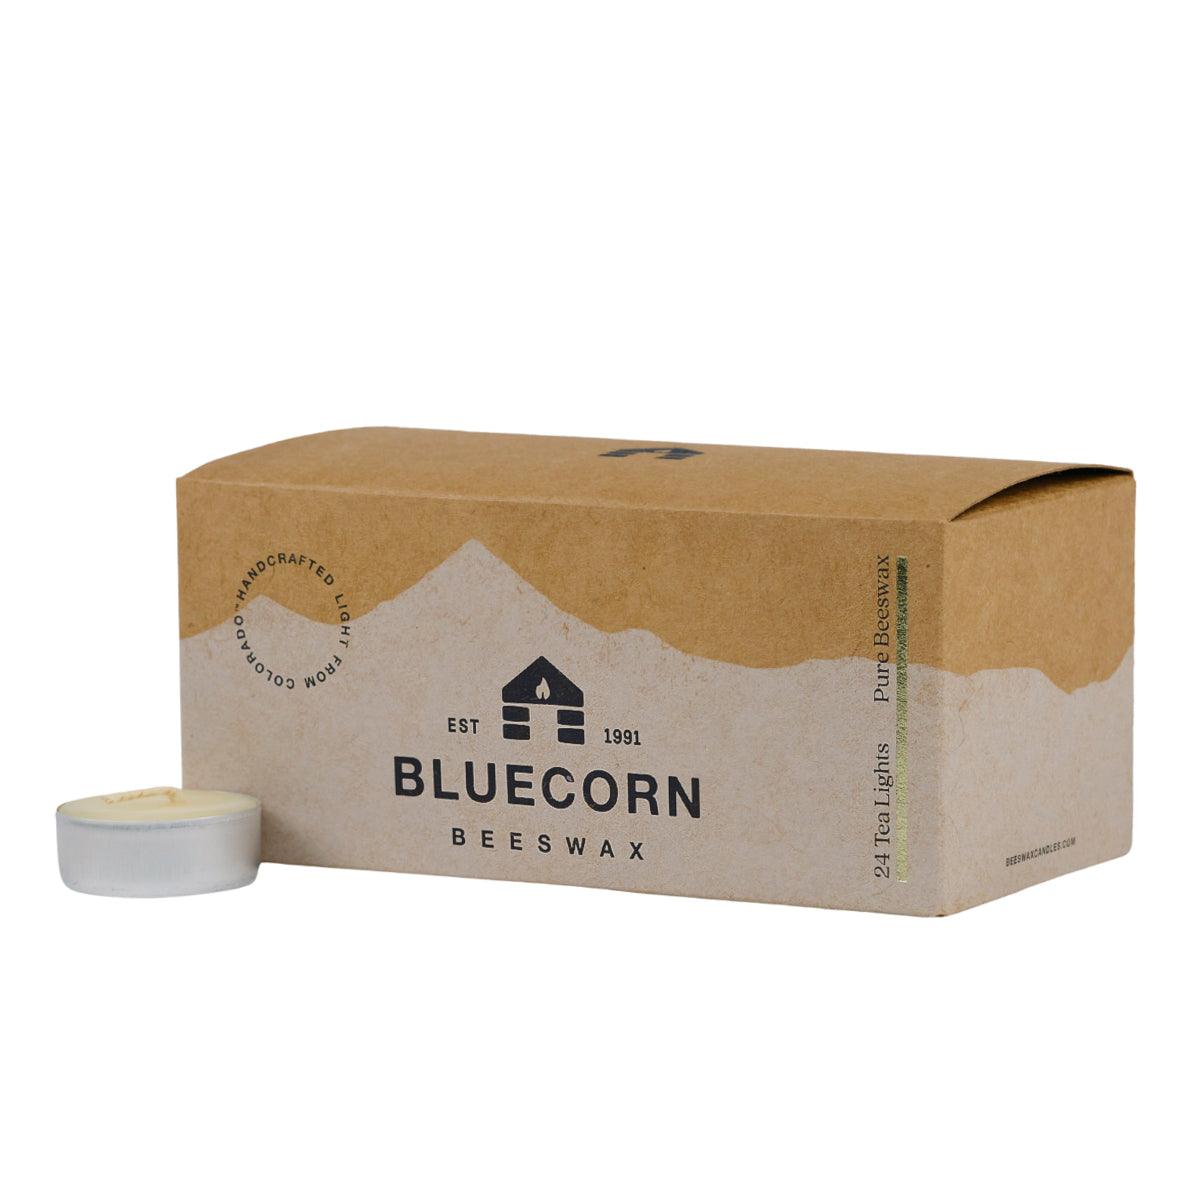 Bluecorn Beeswax 100% Pure Beeswax 24 Pack Ivory Tea Light in Metal cups. Picture features one Tea Light outside of Bluecorn branded Tea Light Box with a white background. Box features Bluecorn Beeswax name and logo, with an outline of Mt. Wilson in white printed on a 100% recycled kraft paper box. Tea lights will burn for about 5 hours each.